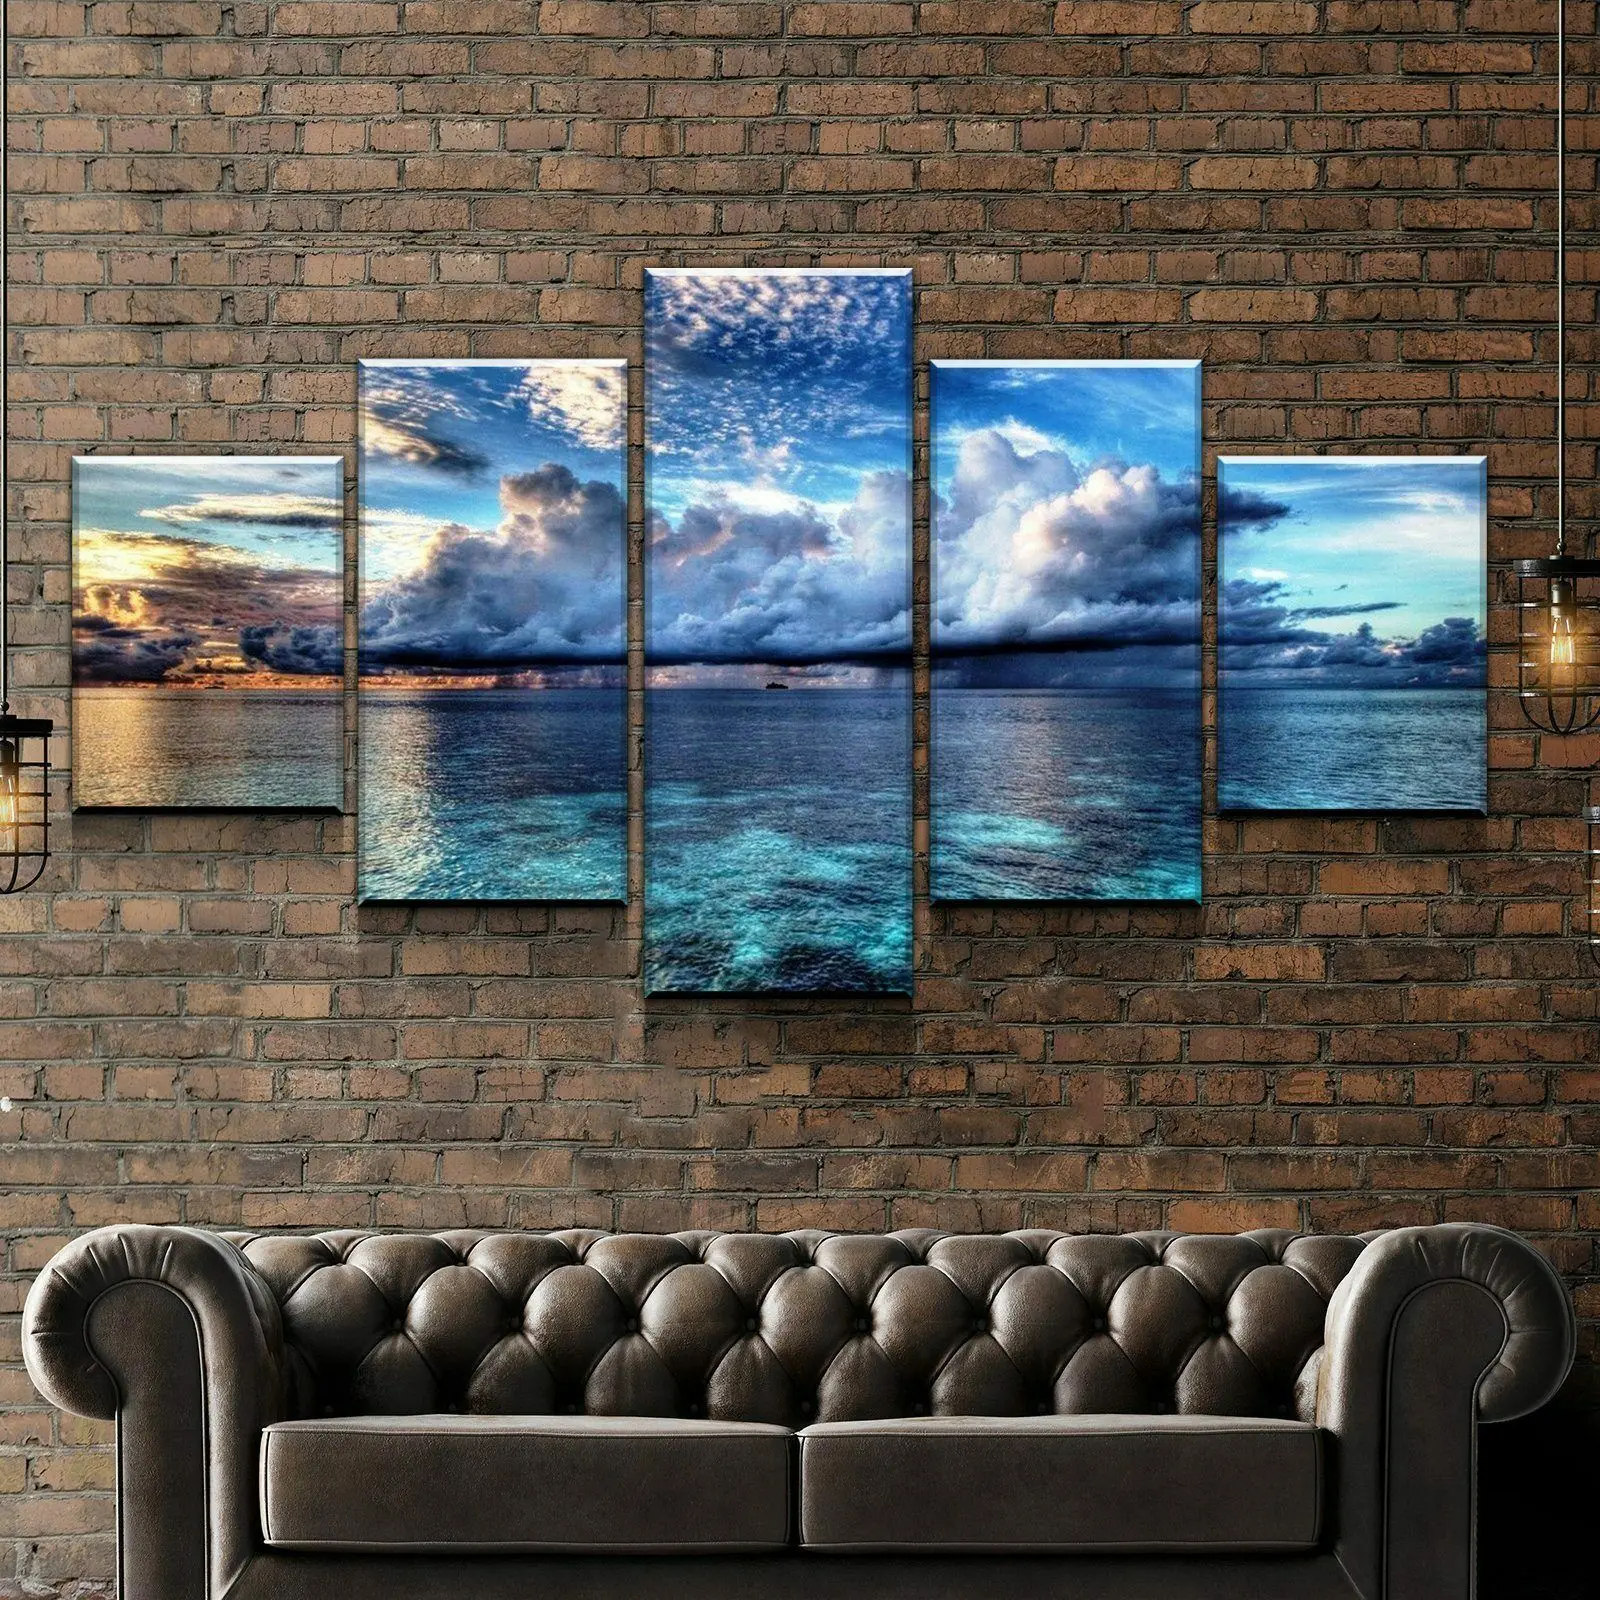 

Calm Waters Ocean Cloud Sky 5 Panel Canvas Picture Print Wall Art Canvas Painting Wall Decor for Living Room Poster No Framed